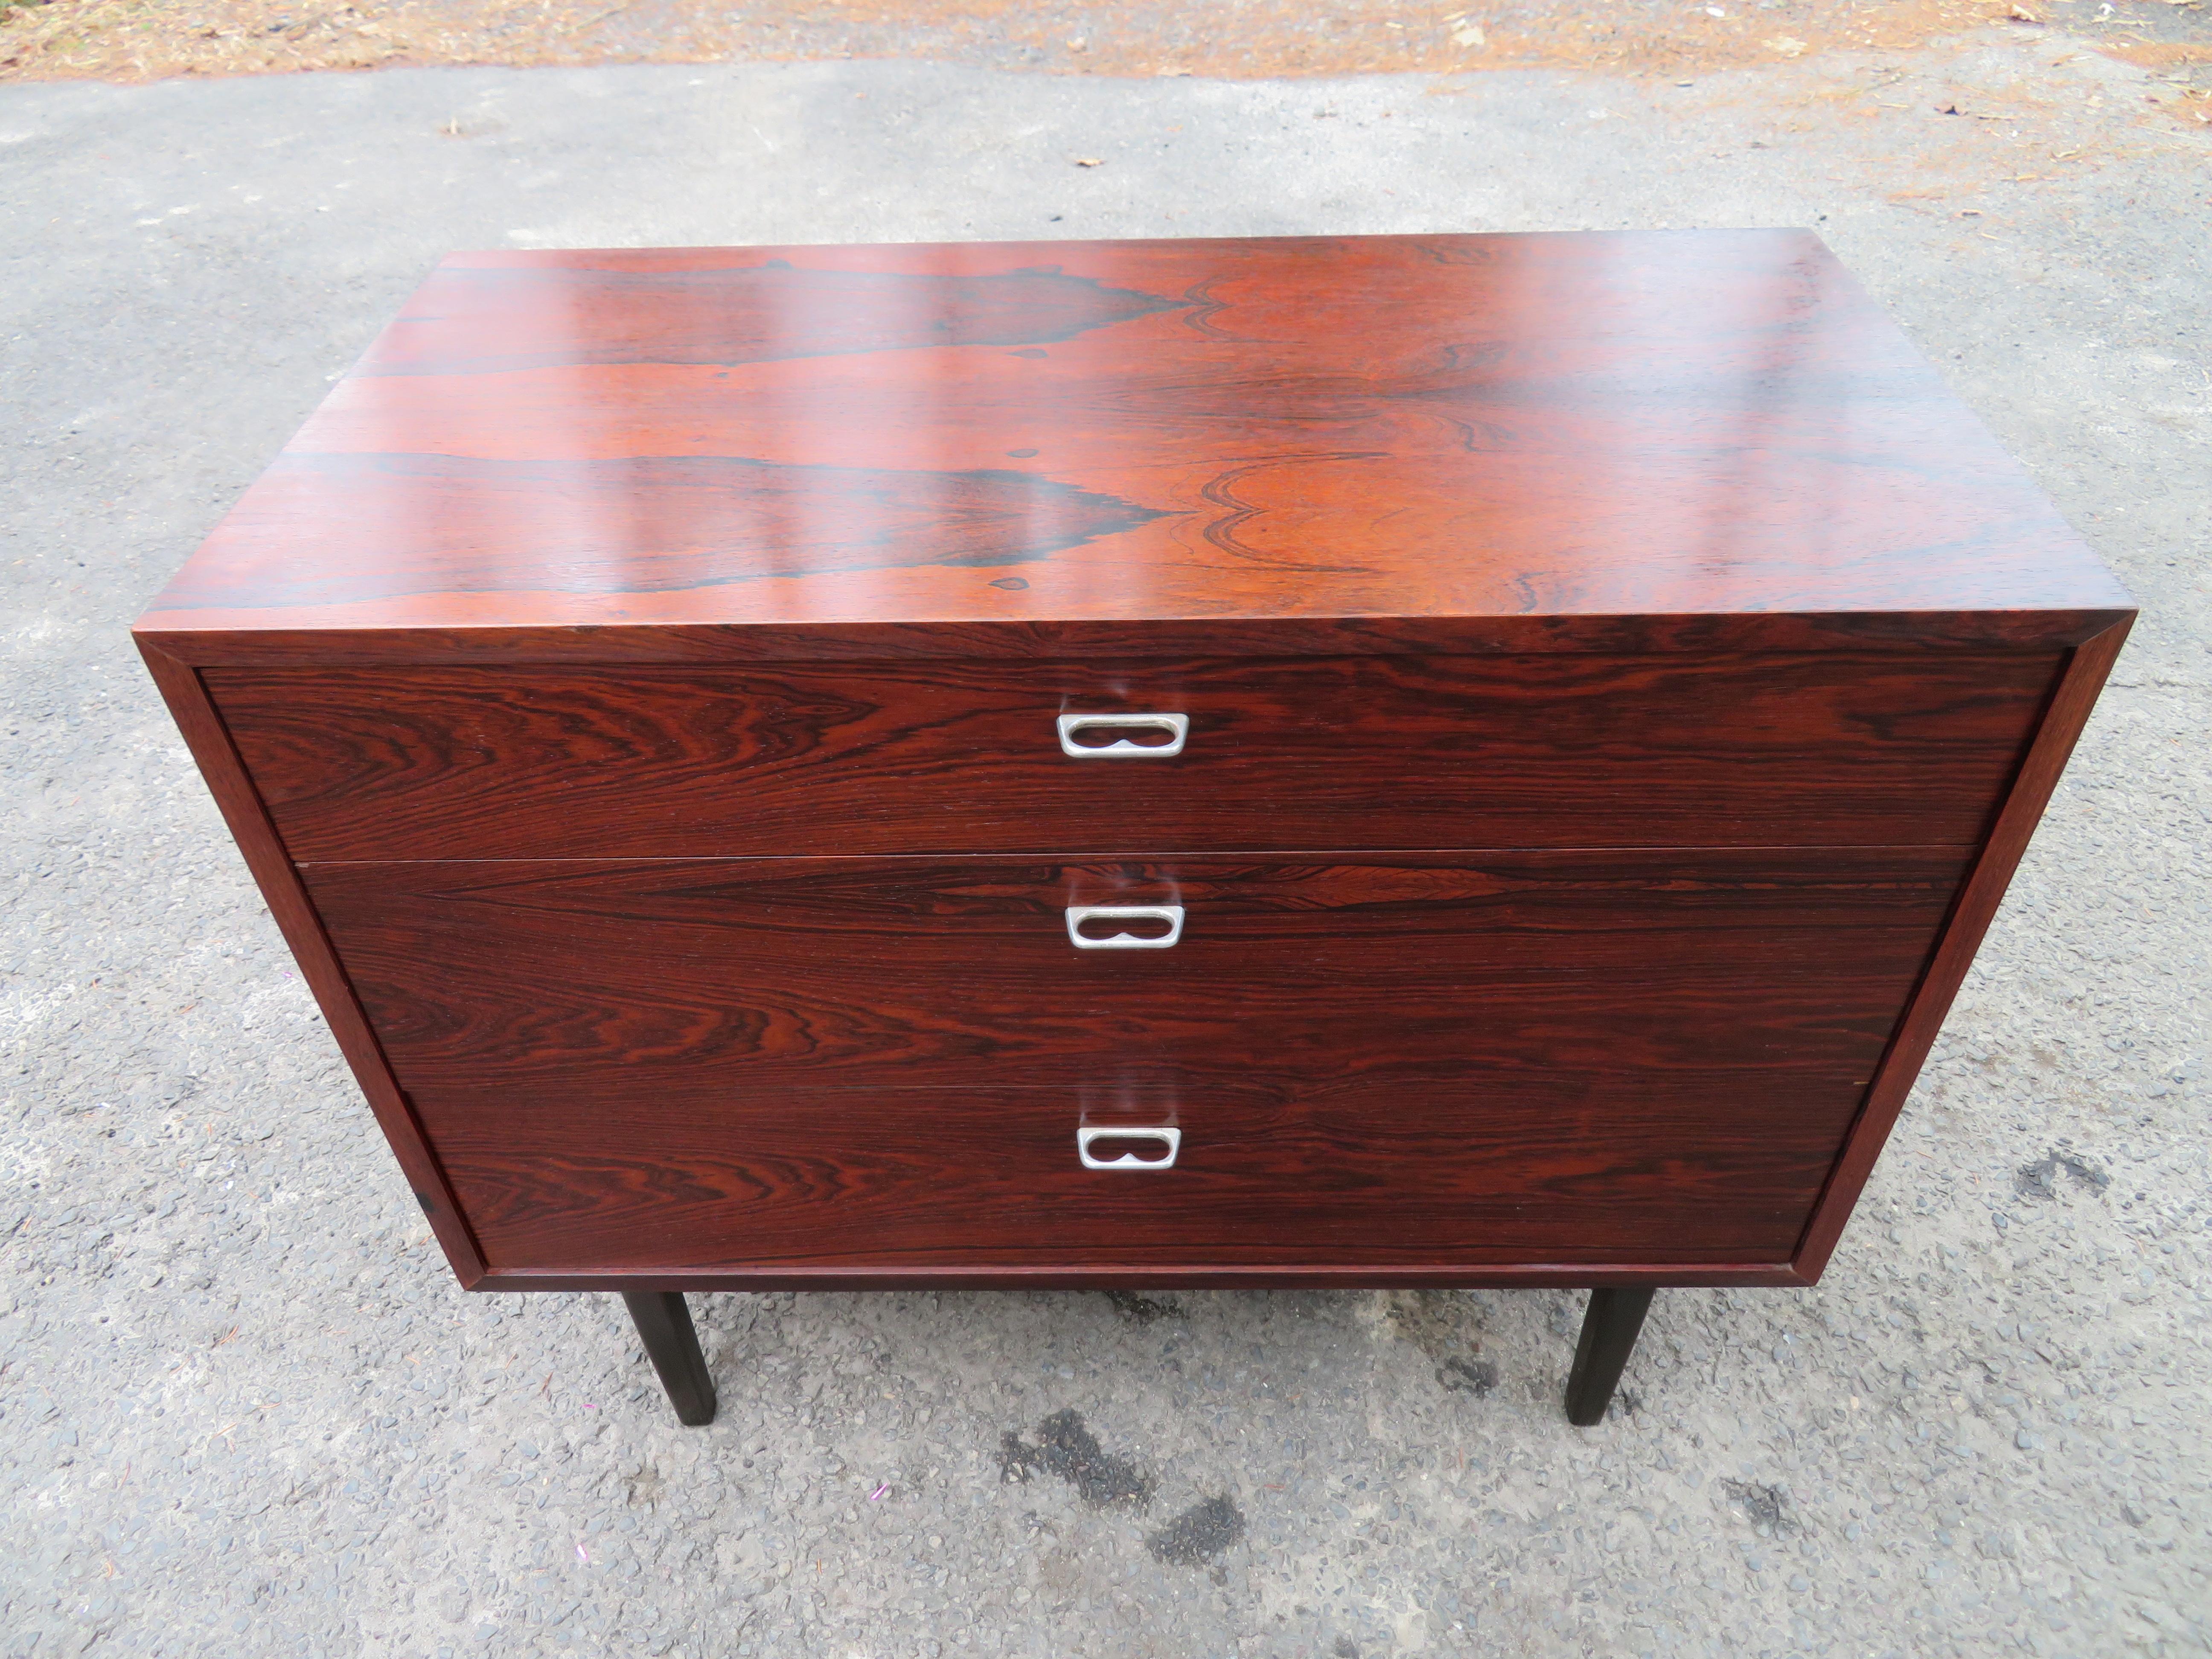 Magnificent rosewood Jack Cartwright Founders bachelors chest of drawers. This piece is in wonderful vintage condition with only light signs of age. The rosewood color is deep and dark with tons of graining.